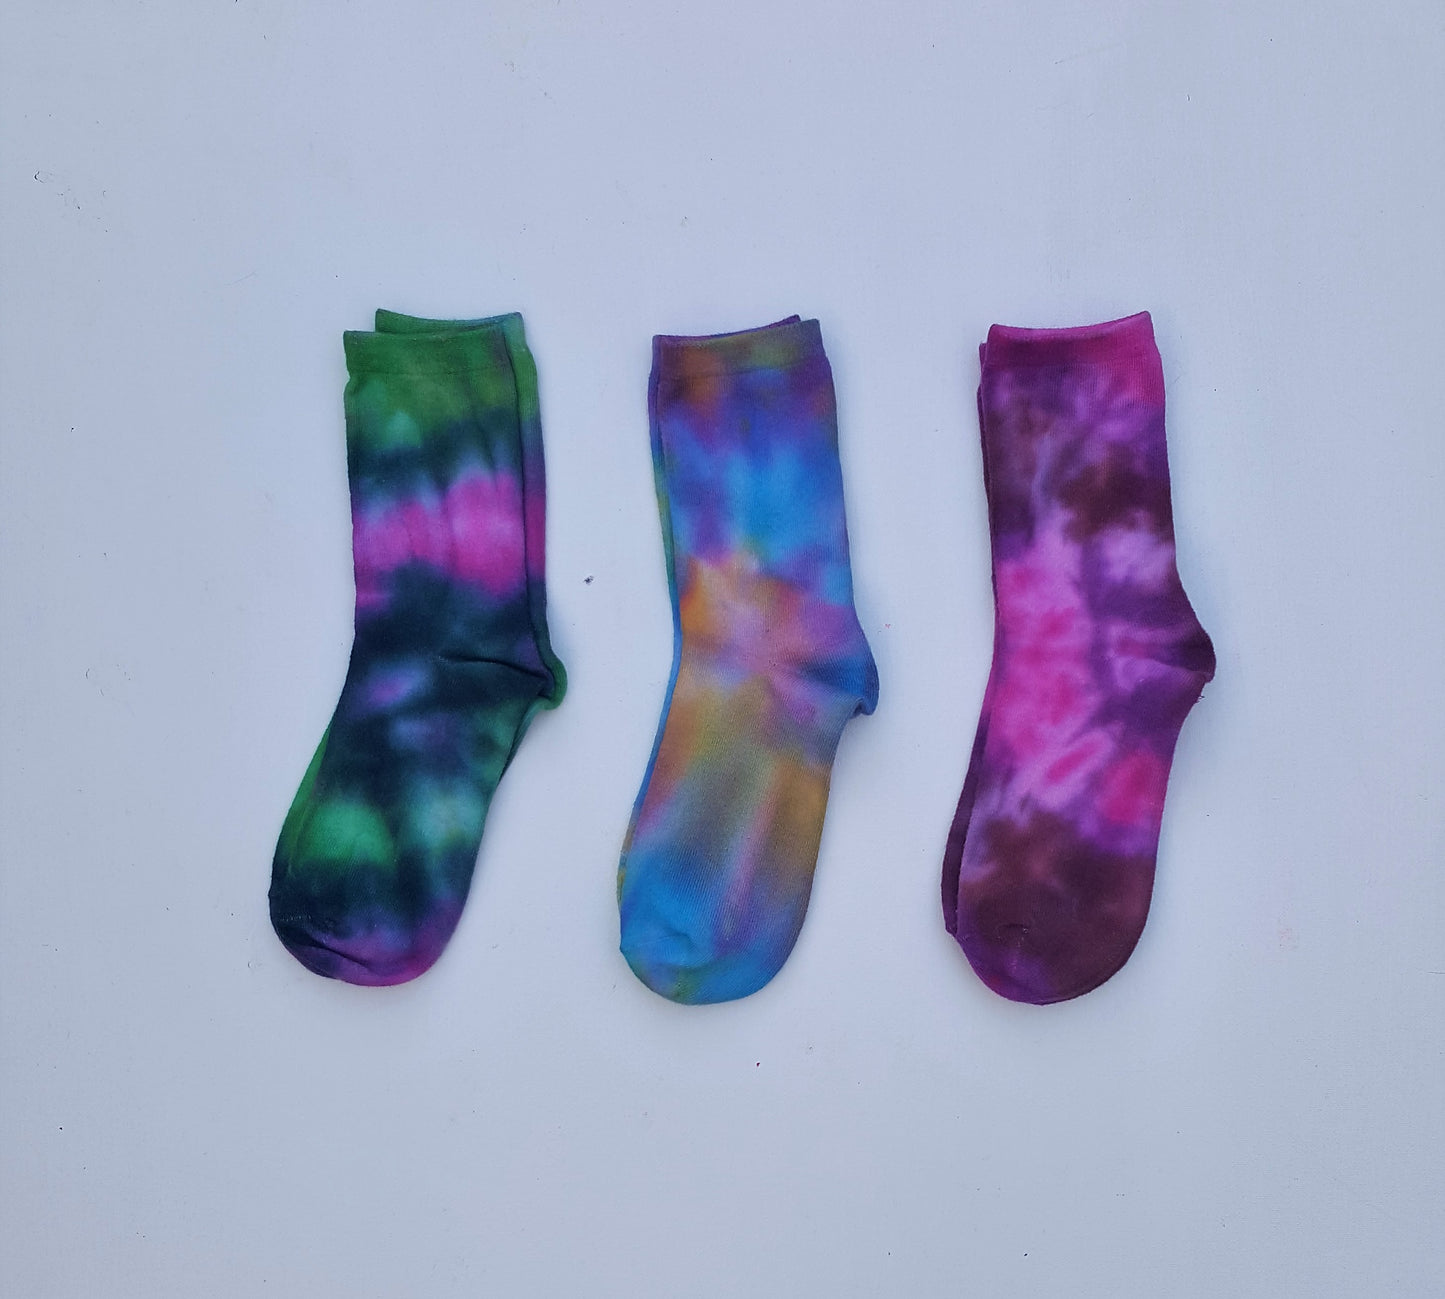 Tie dye socks for women. Gift set of 3 pairs of tie dye socks, packs will each contain x3 pairs of tie dye socks in a mixture of colours and may not be the same as socks shown, however each pair is hand dyed with love and each pair is special and unique.